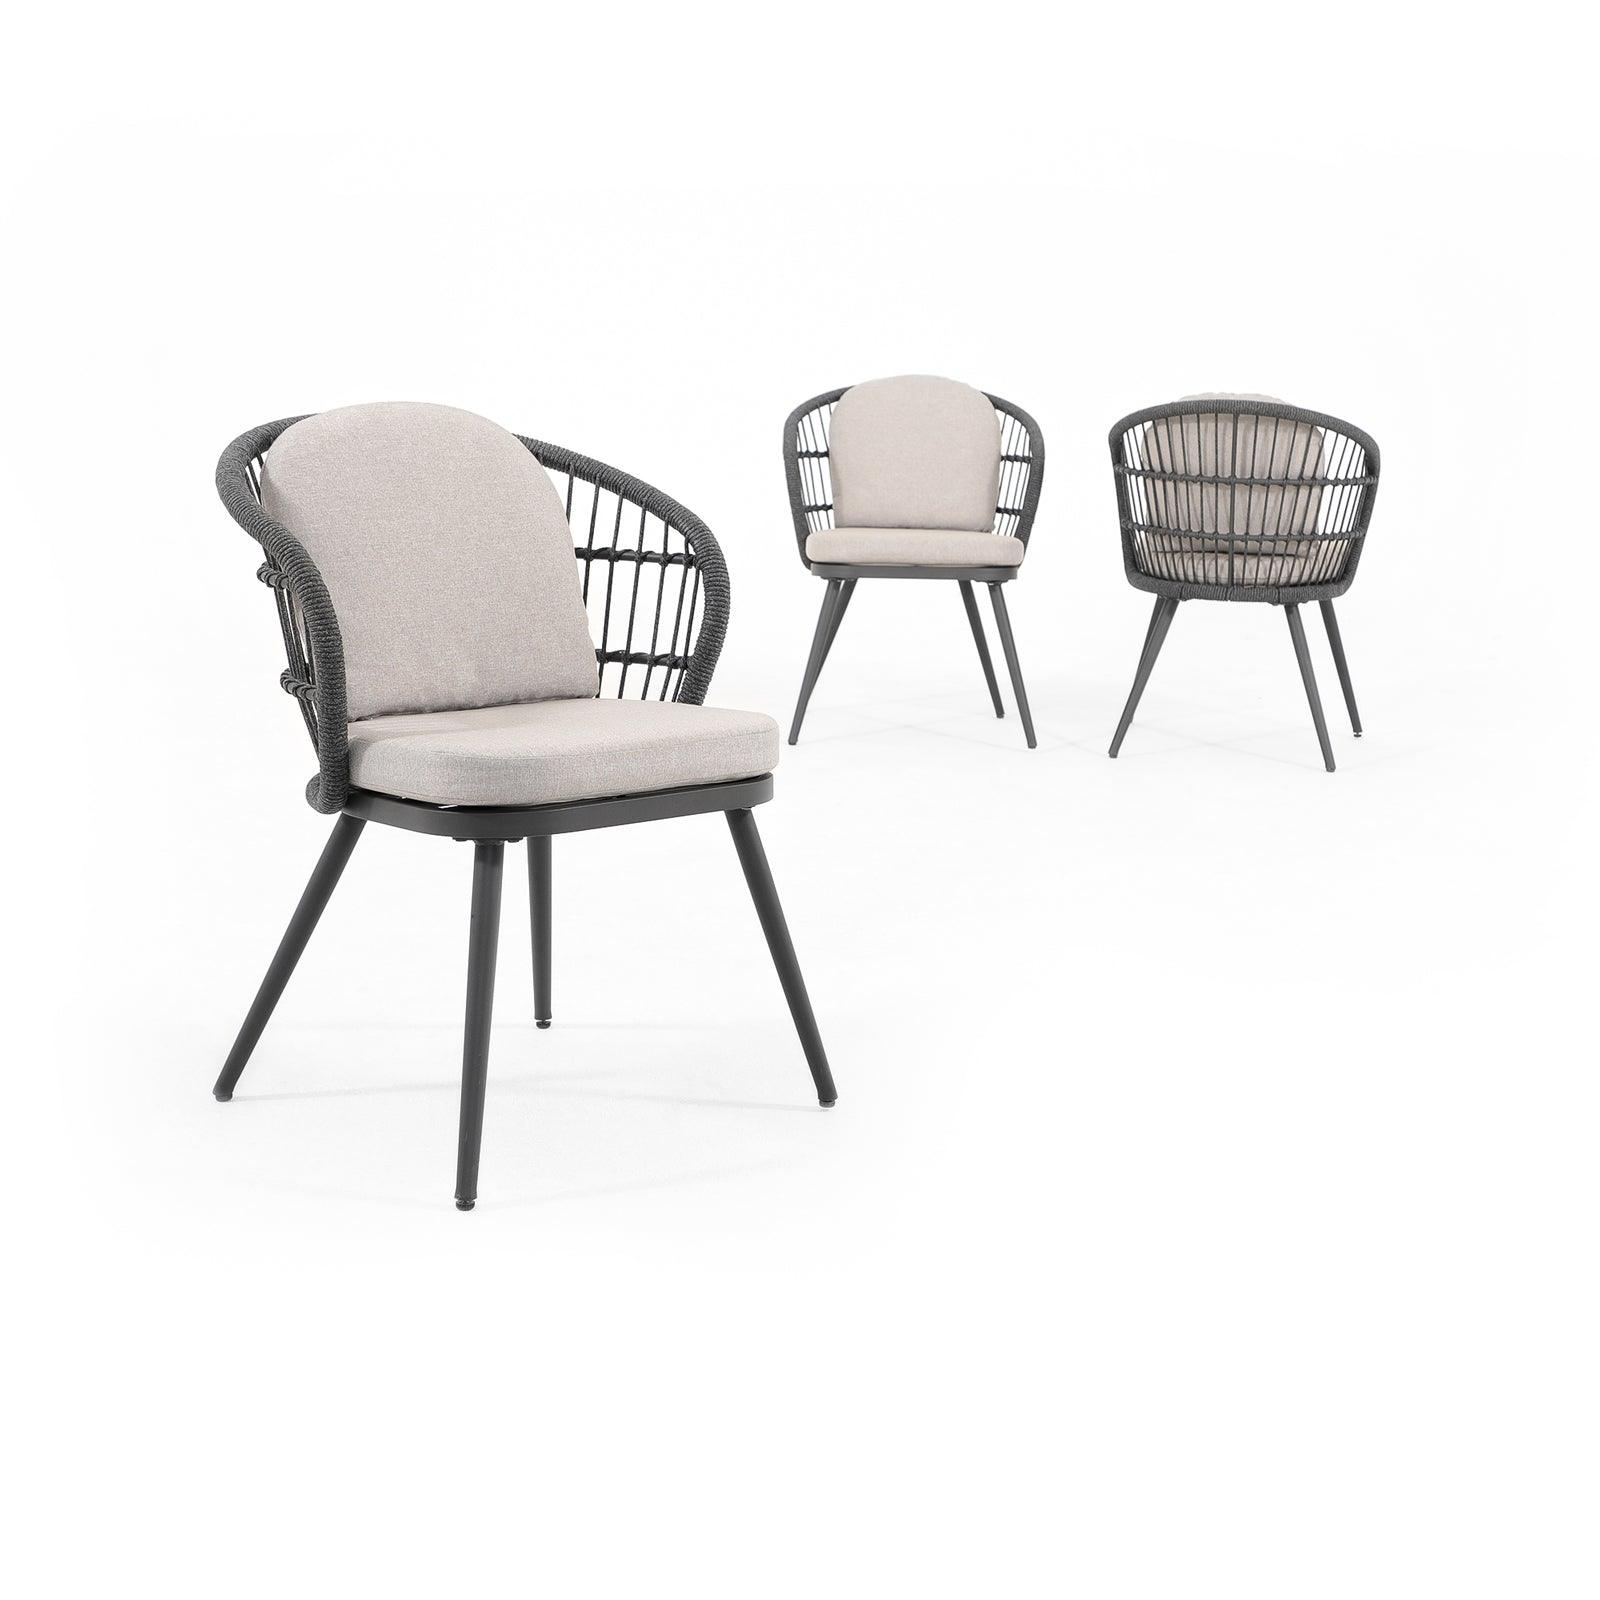 Comino dark grey aluminum frame dining chair with backrest rope design and light grey cushions- Jardina Furniture